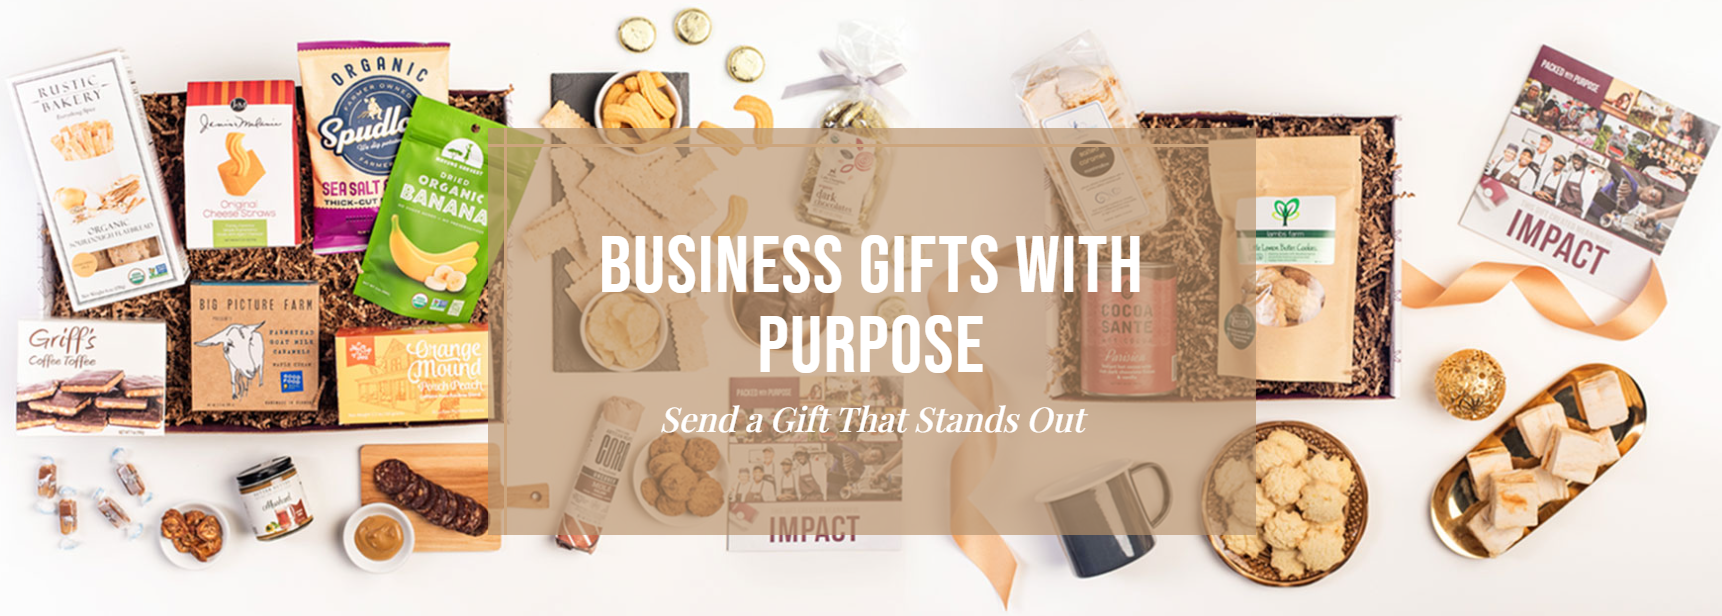 client gifts with purpose